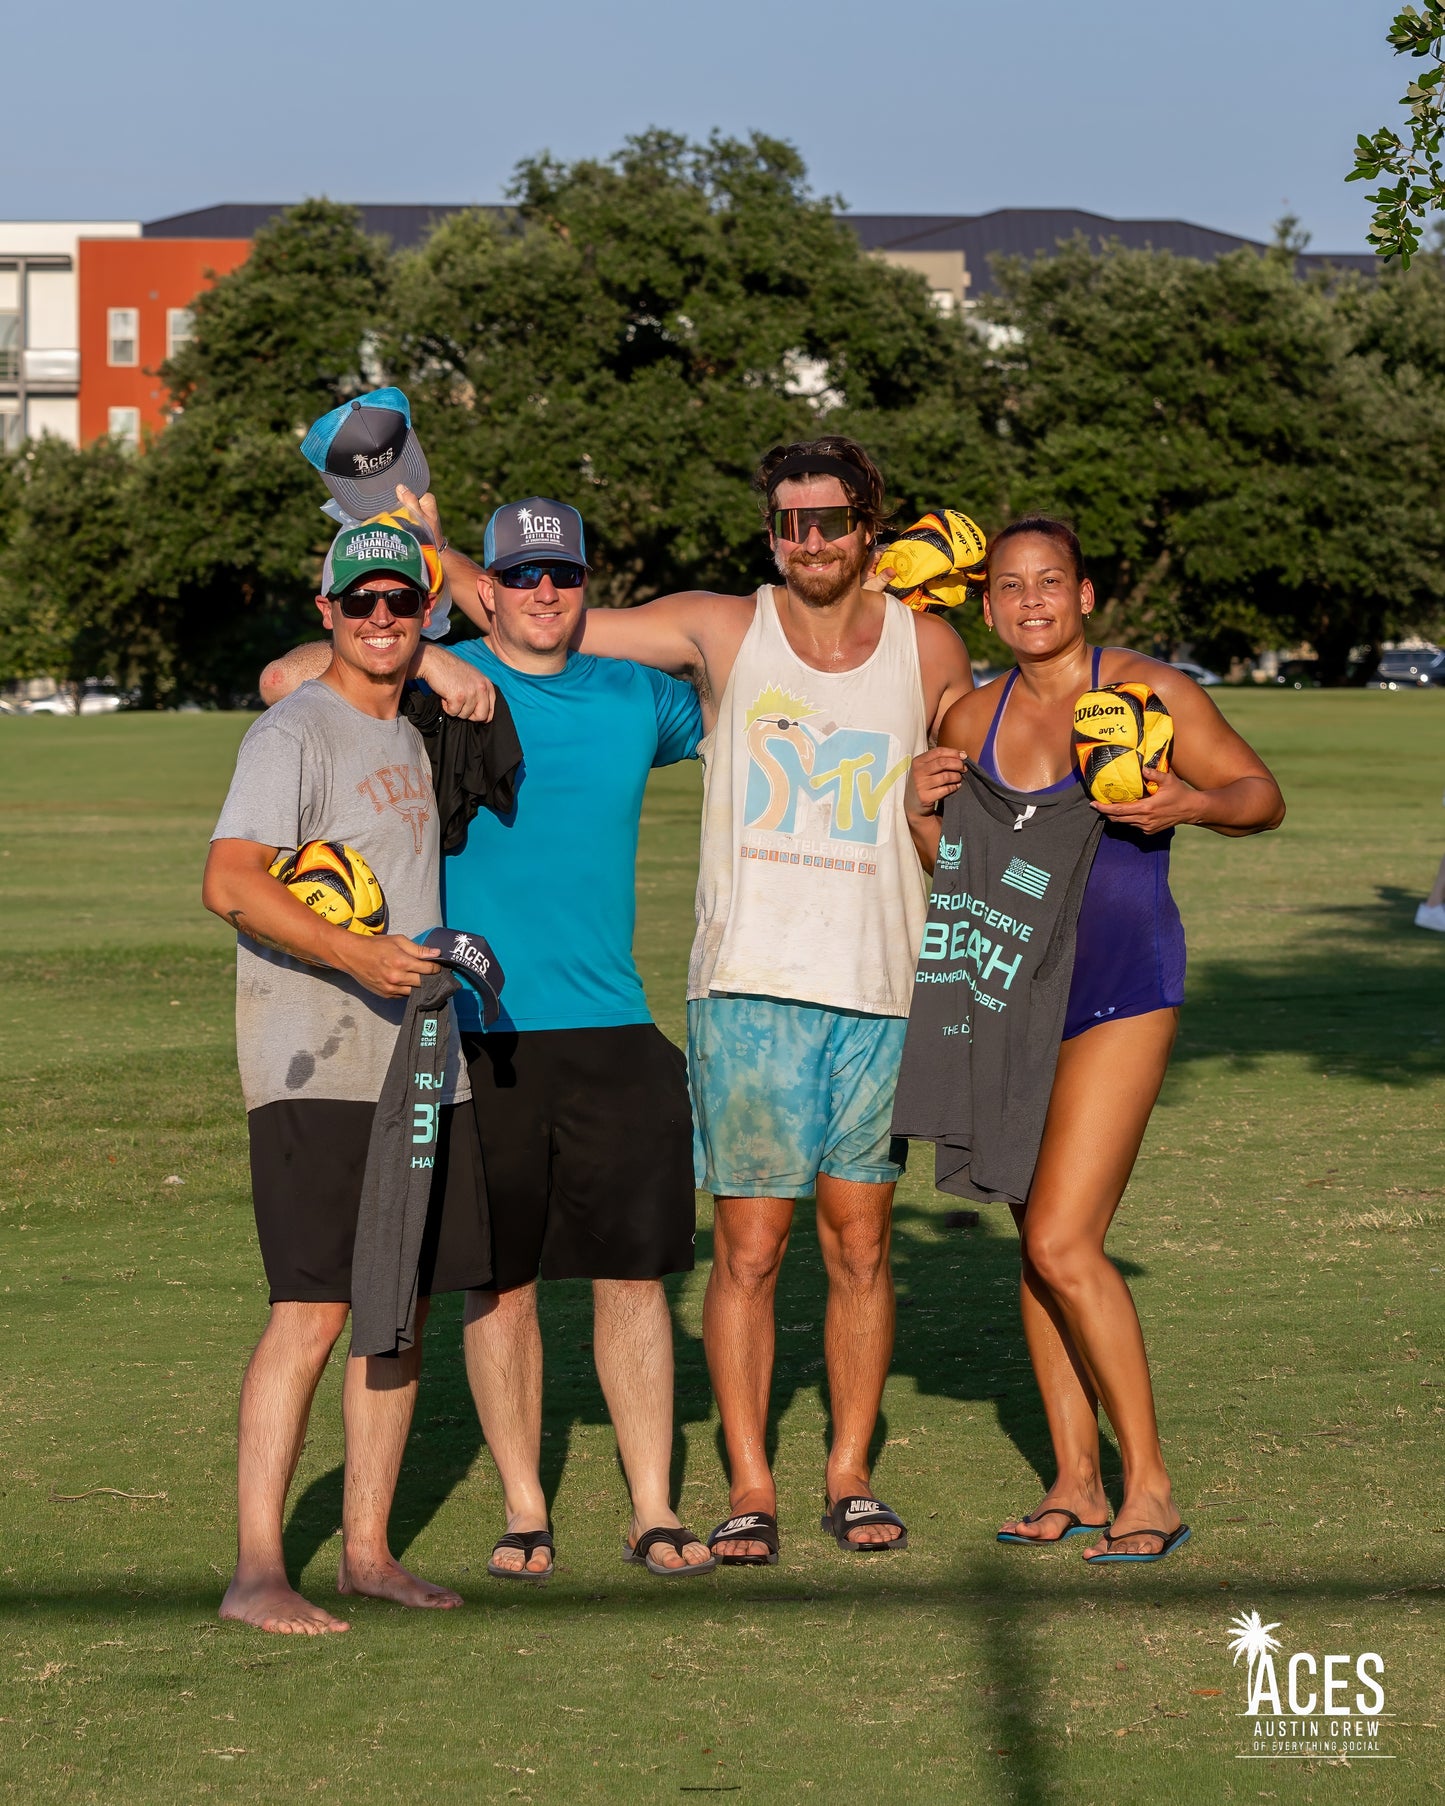 (POSTPONED) ACES Co-Ed Blind 4's Sand Volleyball Tourney @ The Domain - September 23rd - Sponsored by Project Serve